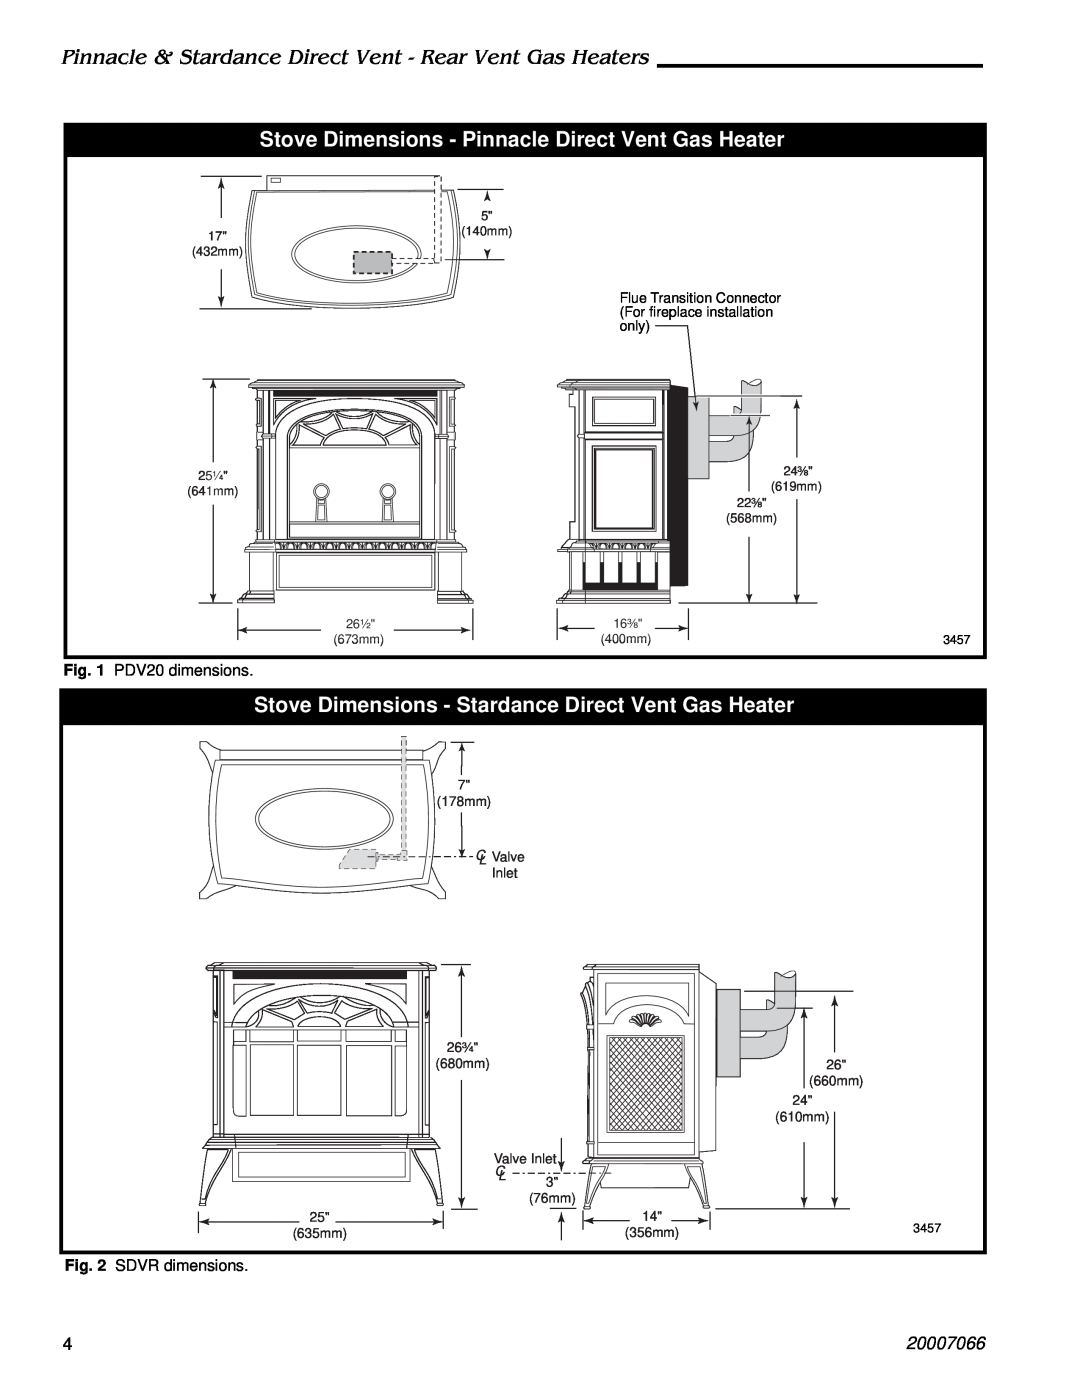 Vermont Casting 4070 Stove Dimensions - Pinnacle Direct Vent Gas Heater, 20007066, PDV20 dimensions, SDVR dimensions, 76mm 